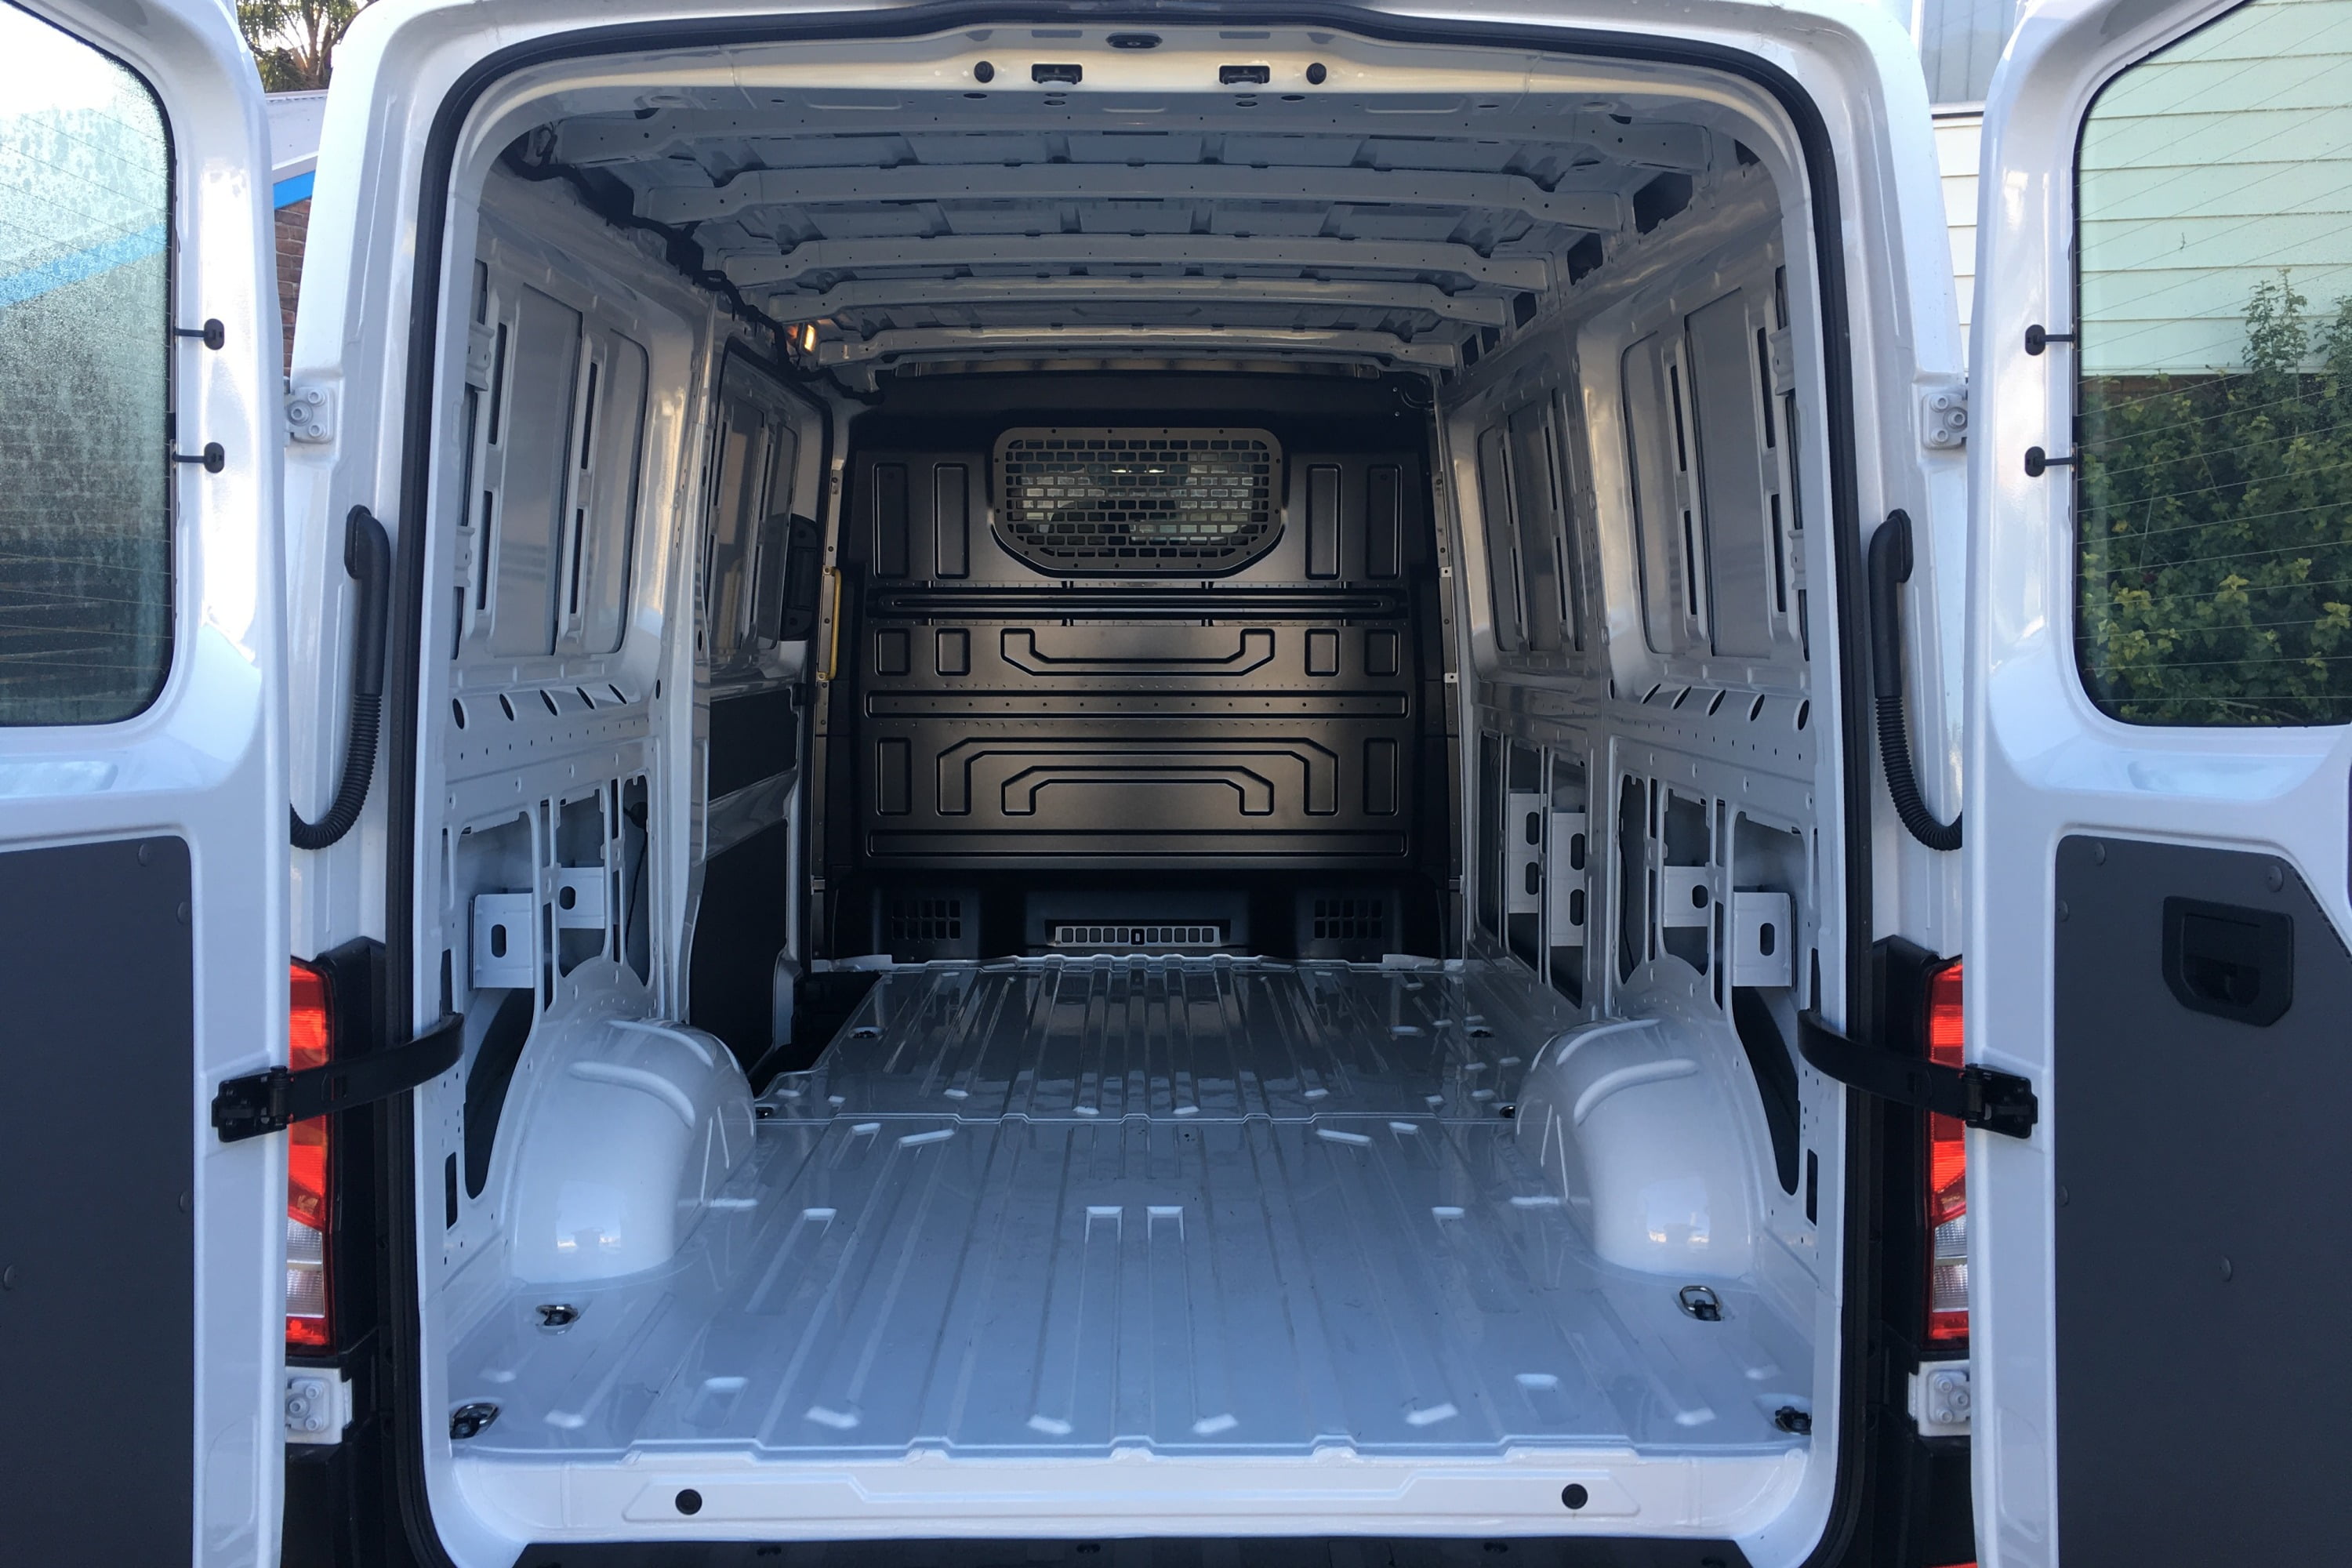 2019 VW Crafter 4MOTION interior space